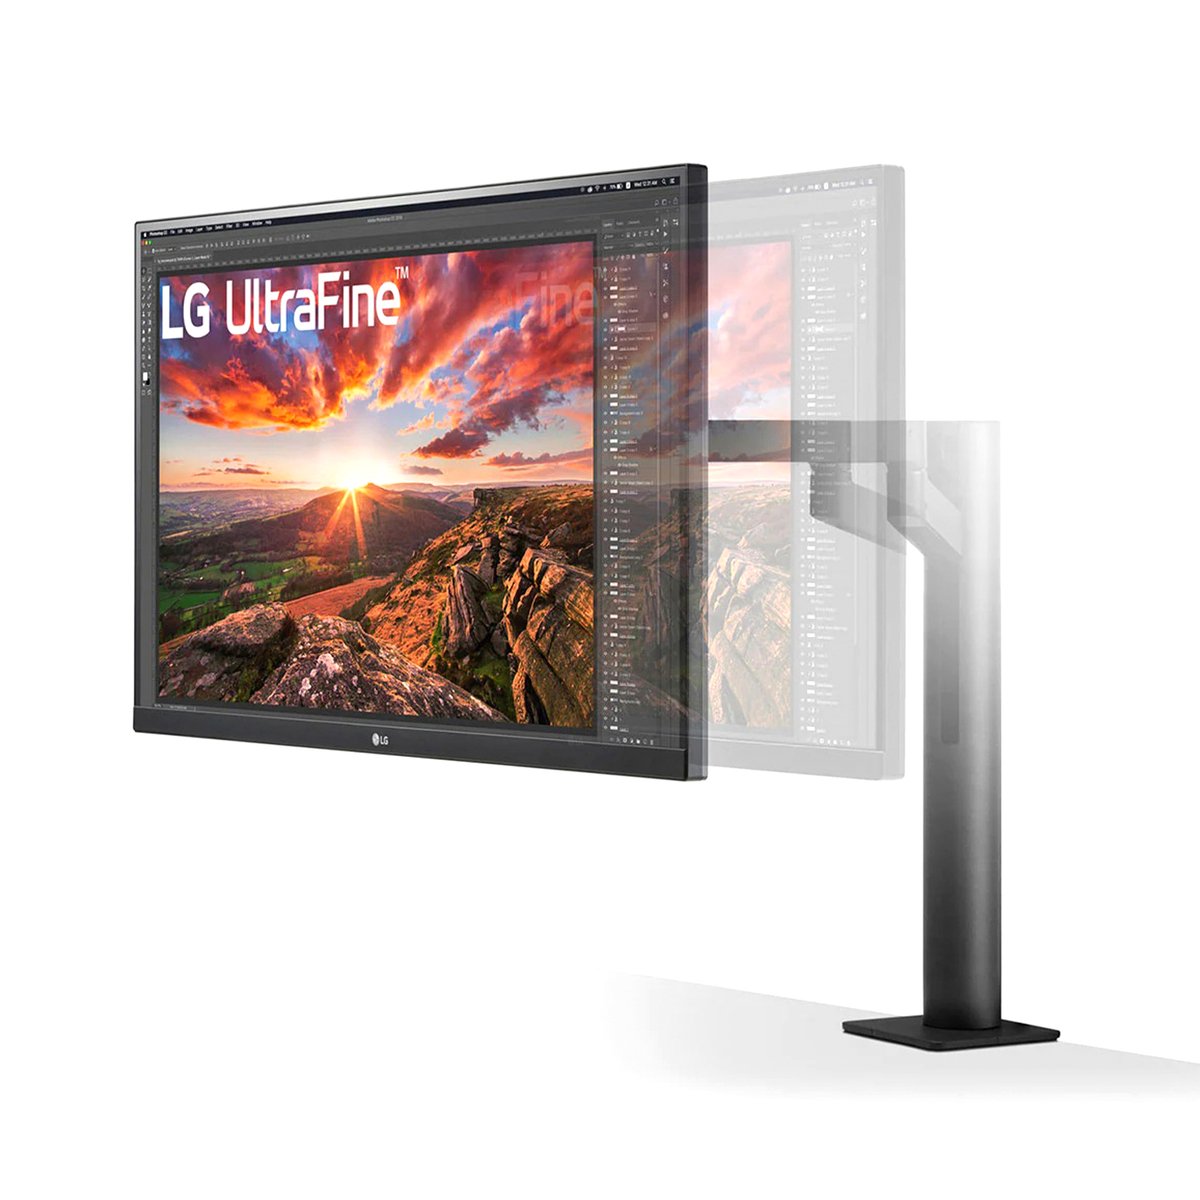 LG 27'' UltraFine UHD IPS USB-C HDR Monitor with Ergo Stand 27UN880-B